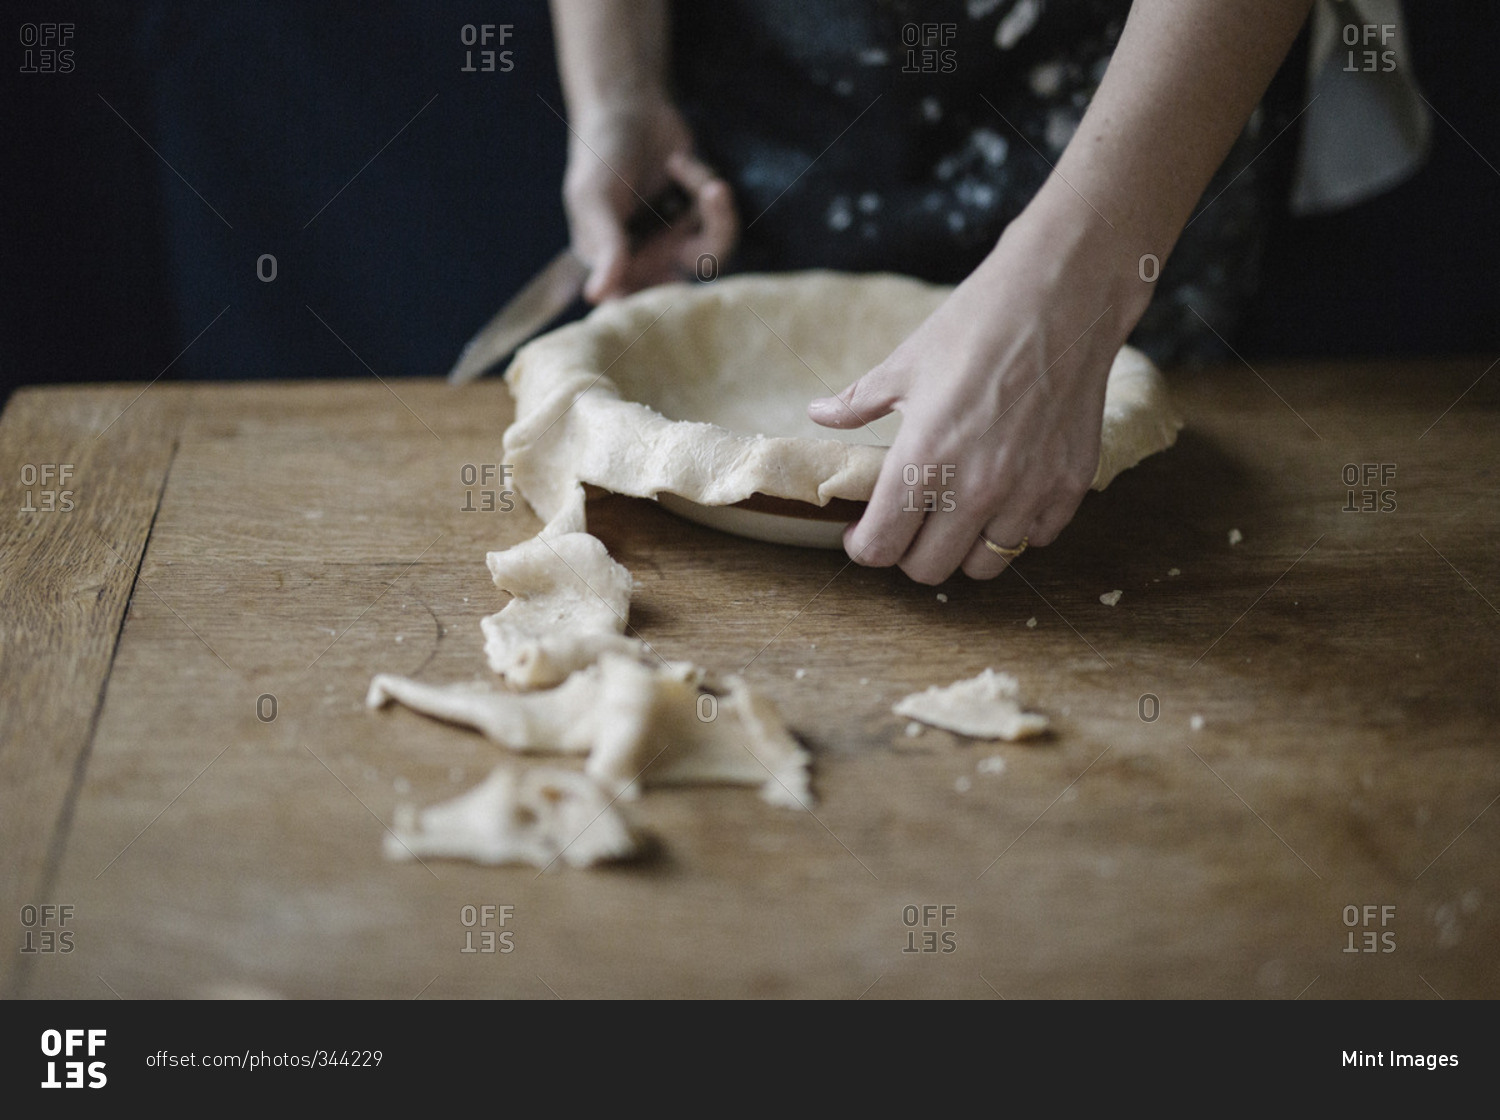 A woman trimming pastry dough to line a pie dish